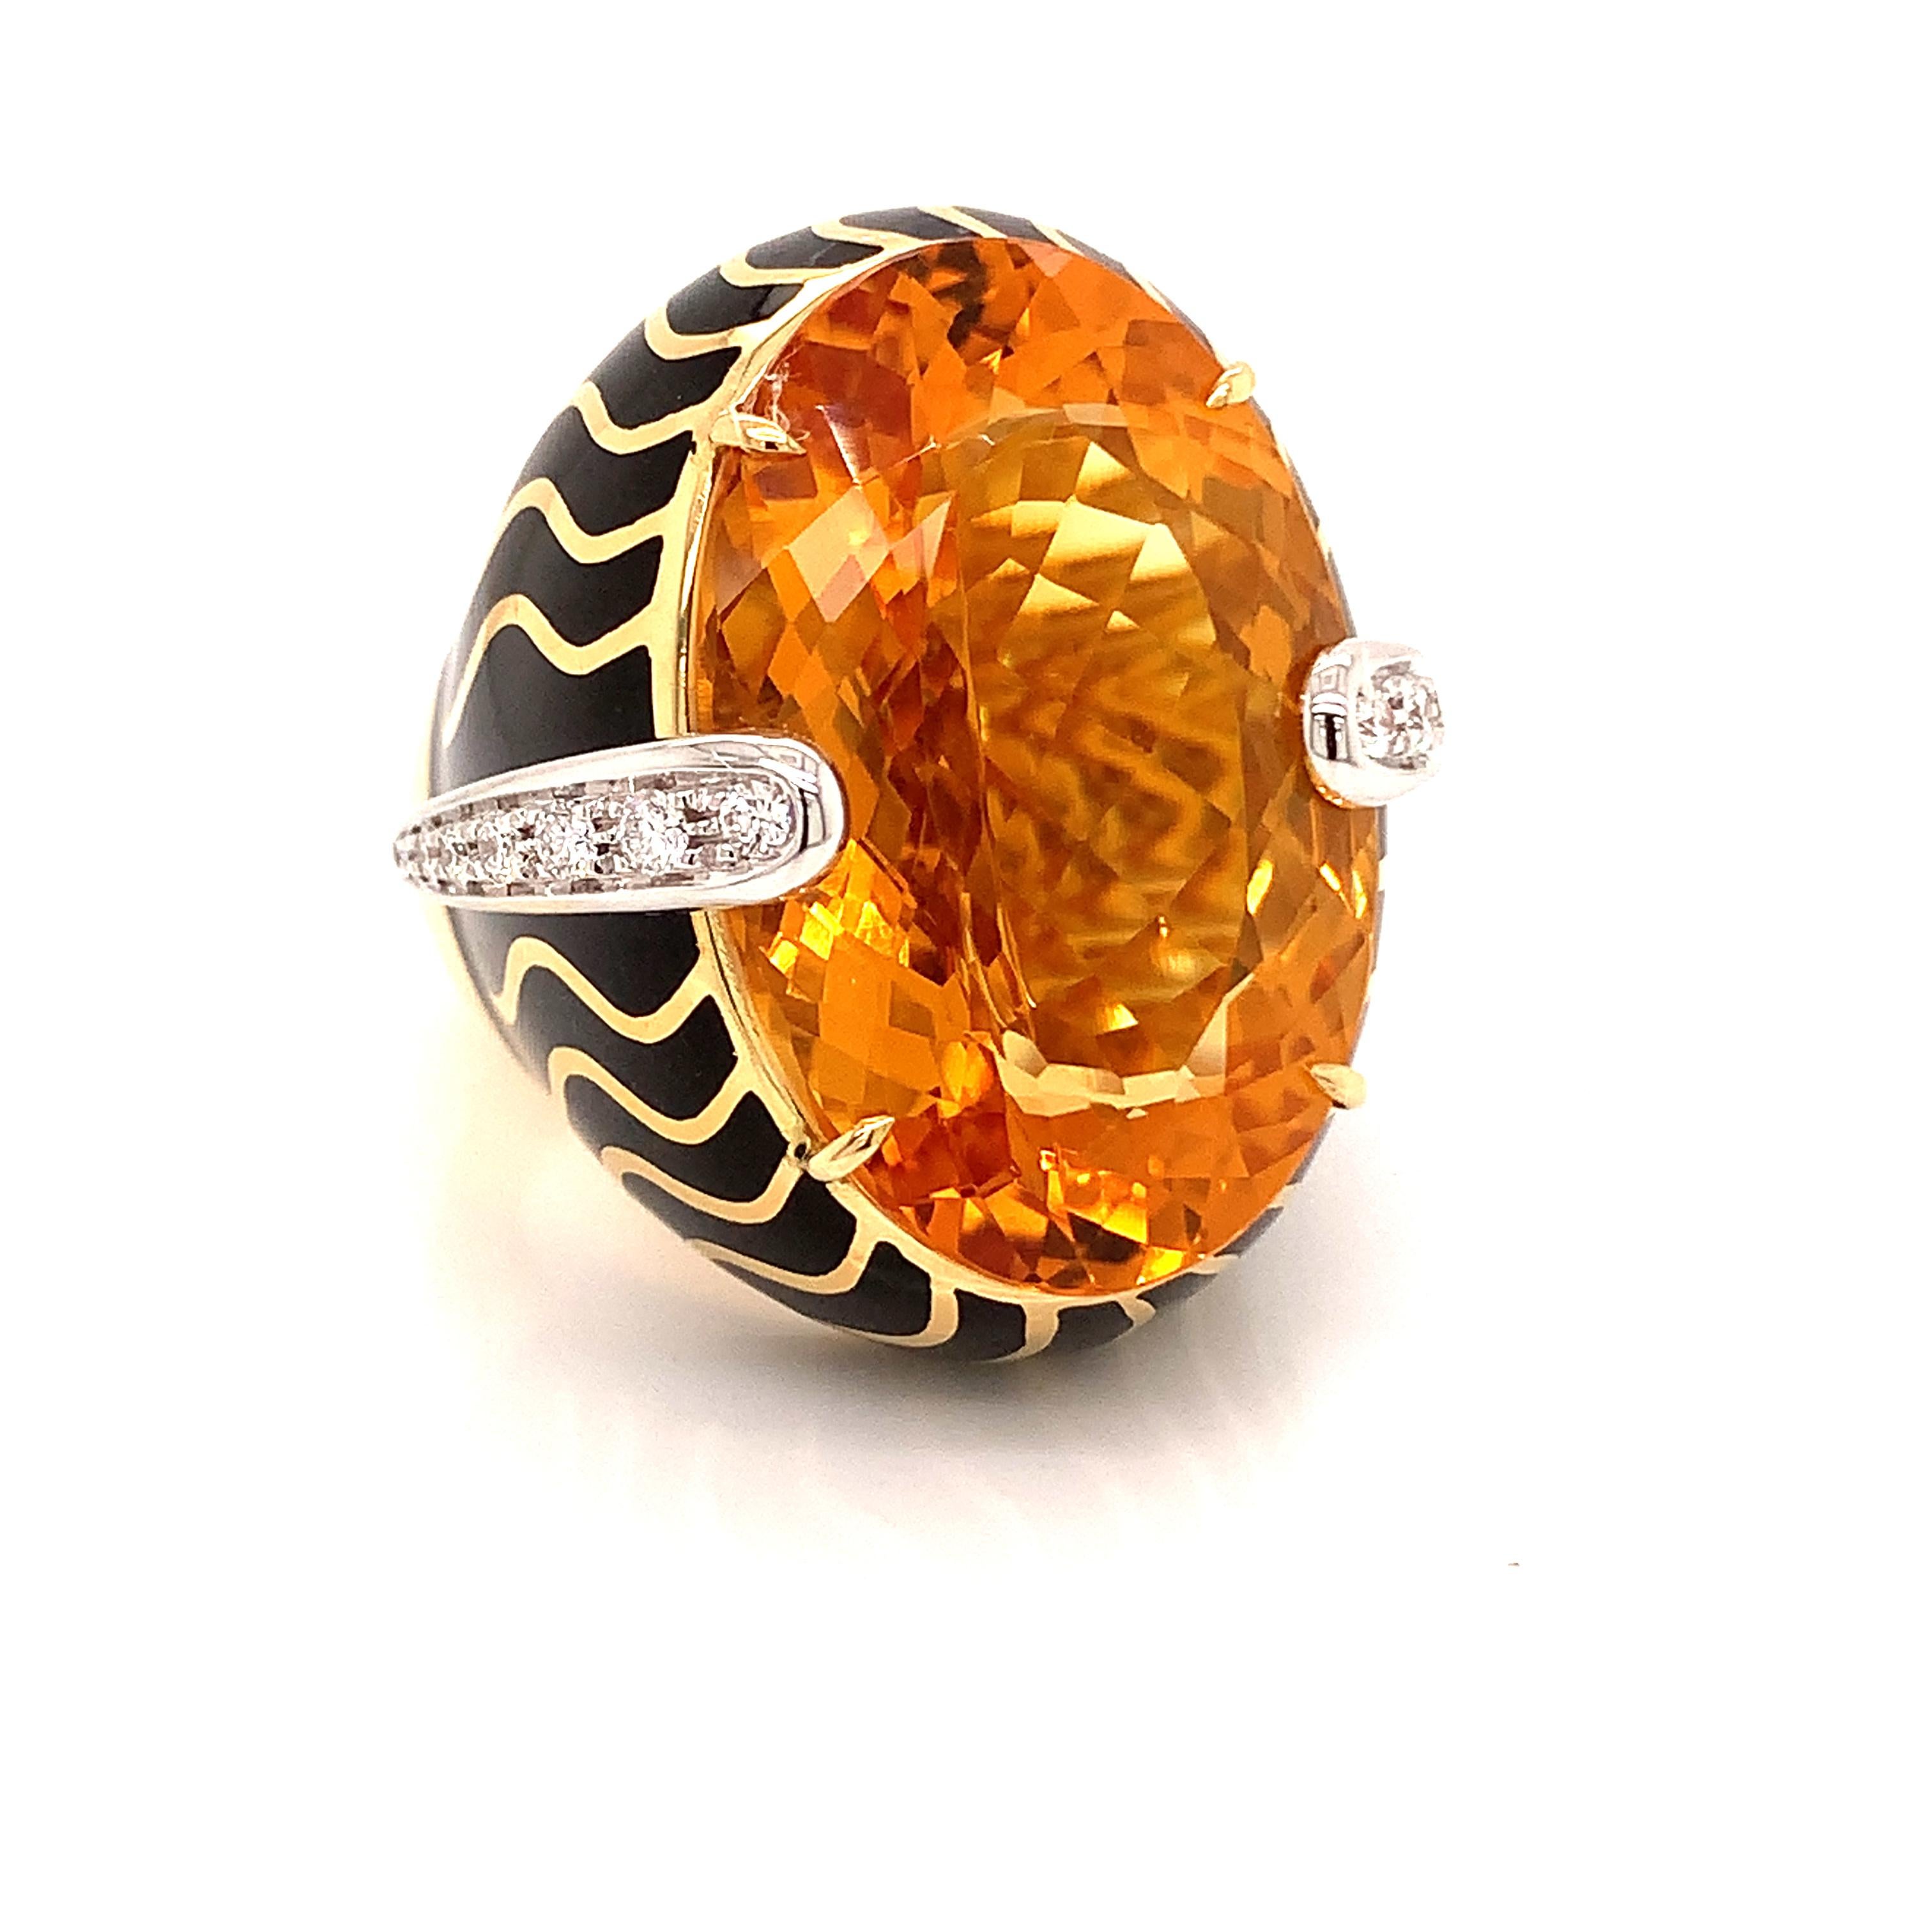 On sale on First Dibs only for 3 week.  This beautiful ring is a stunning piece created in Valenza.  18kt white gold grs 21.30  a beautiful oval citrine ct 29.15 , two white gold elements set in white diamonds ct 0.33  and beautiful animalier motif